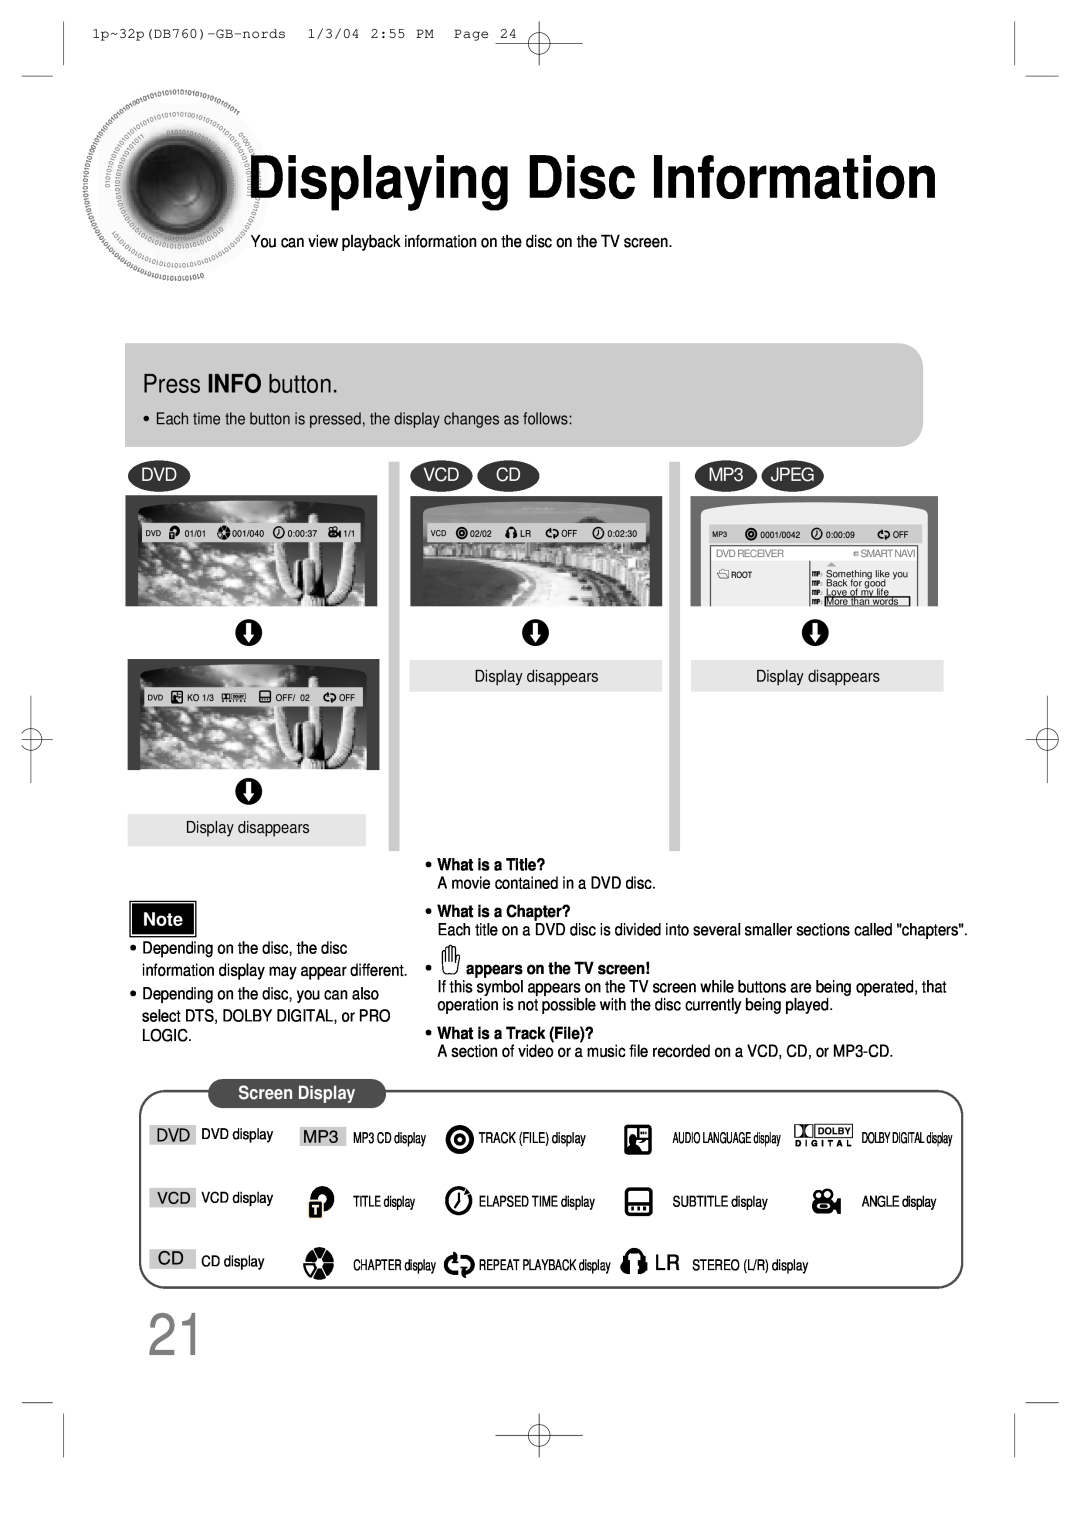 Samsung HTDB760TH/UMG manual DisplayingDisc Information, Press INFO button, Screen Display, MP3 JPEG, What is a Title? 